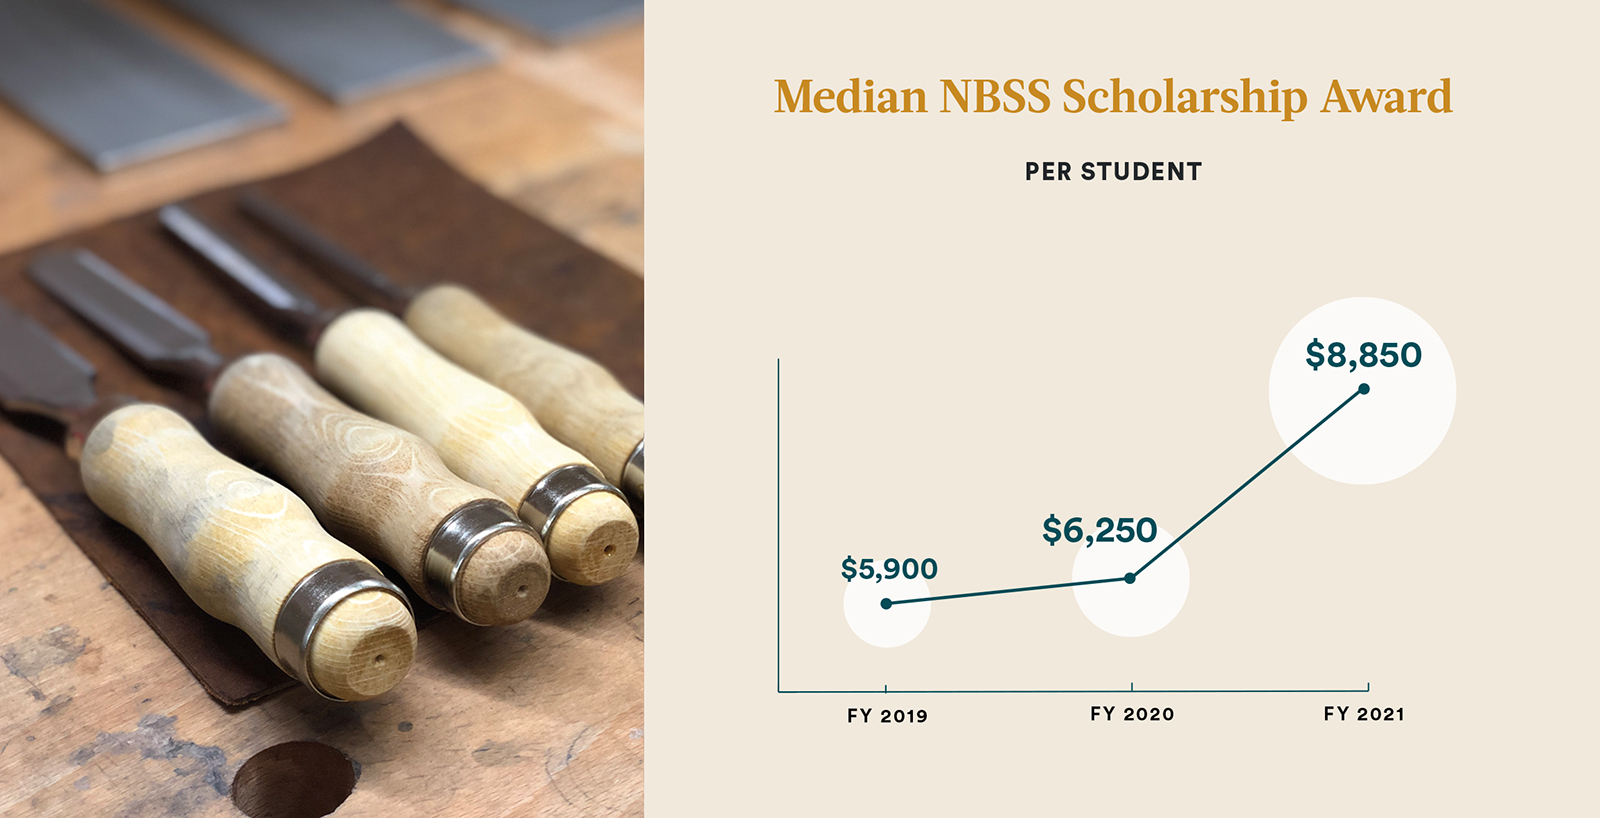 Median NBSS Scholarship Award
Amount has grown from $5,900 per student in 2019 to $8,850 in 2021.